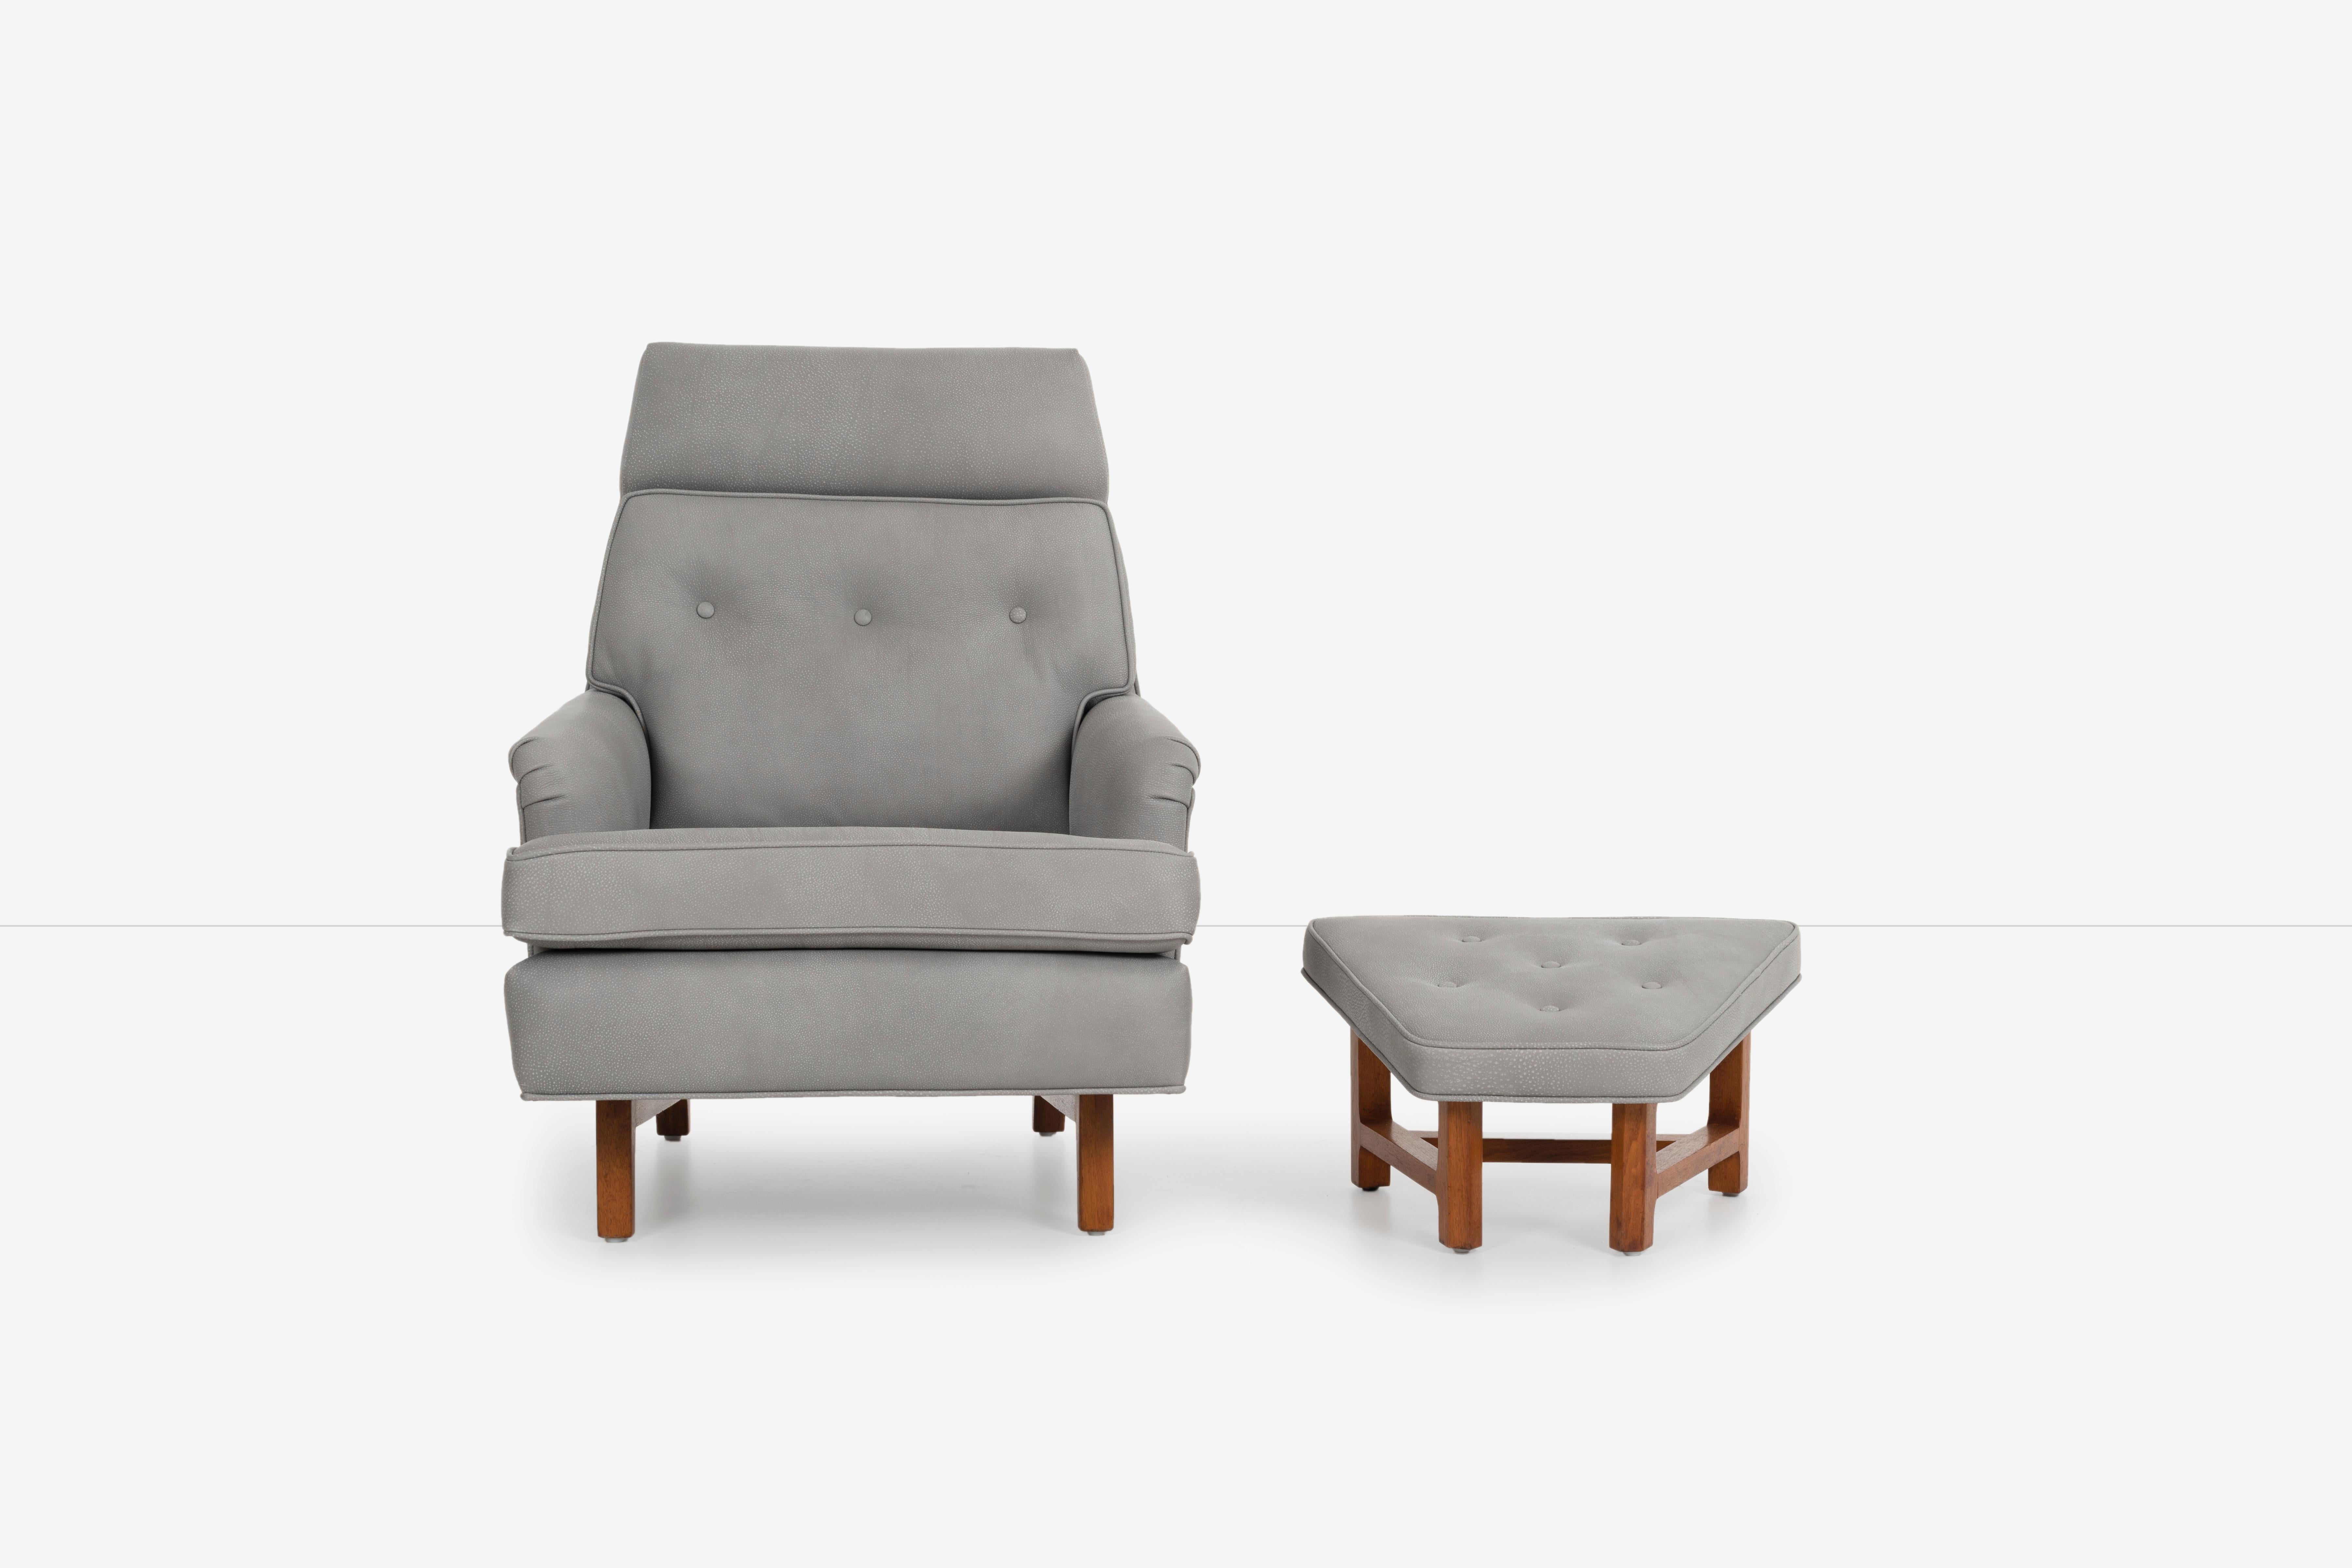 Edward Wormley for Dunbar Janus lounge chair and ottoman
Reupholstered with soft grey leather by Great Plains. Fixed pillow back sections with loose cushion seat and buttoned trapezoid ottoman, solid walnut bases.
Dunbar 